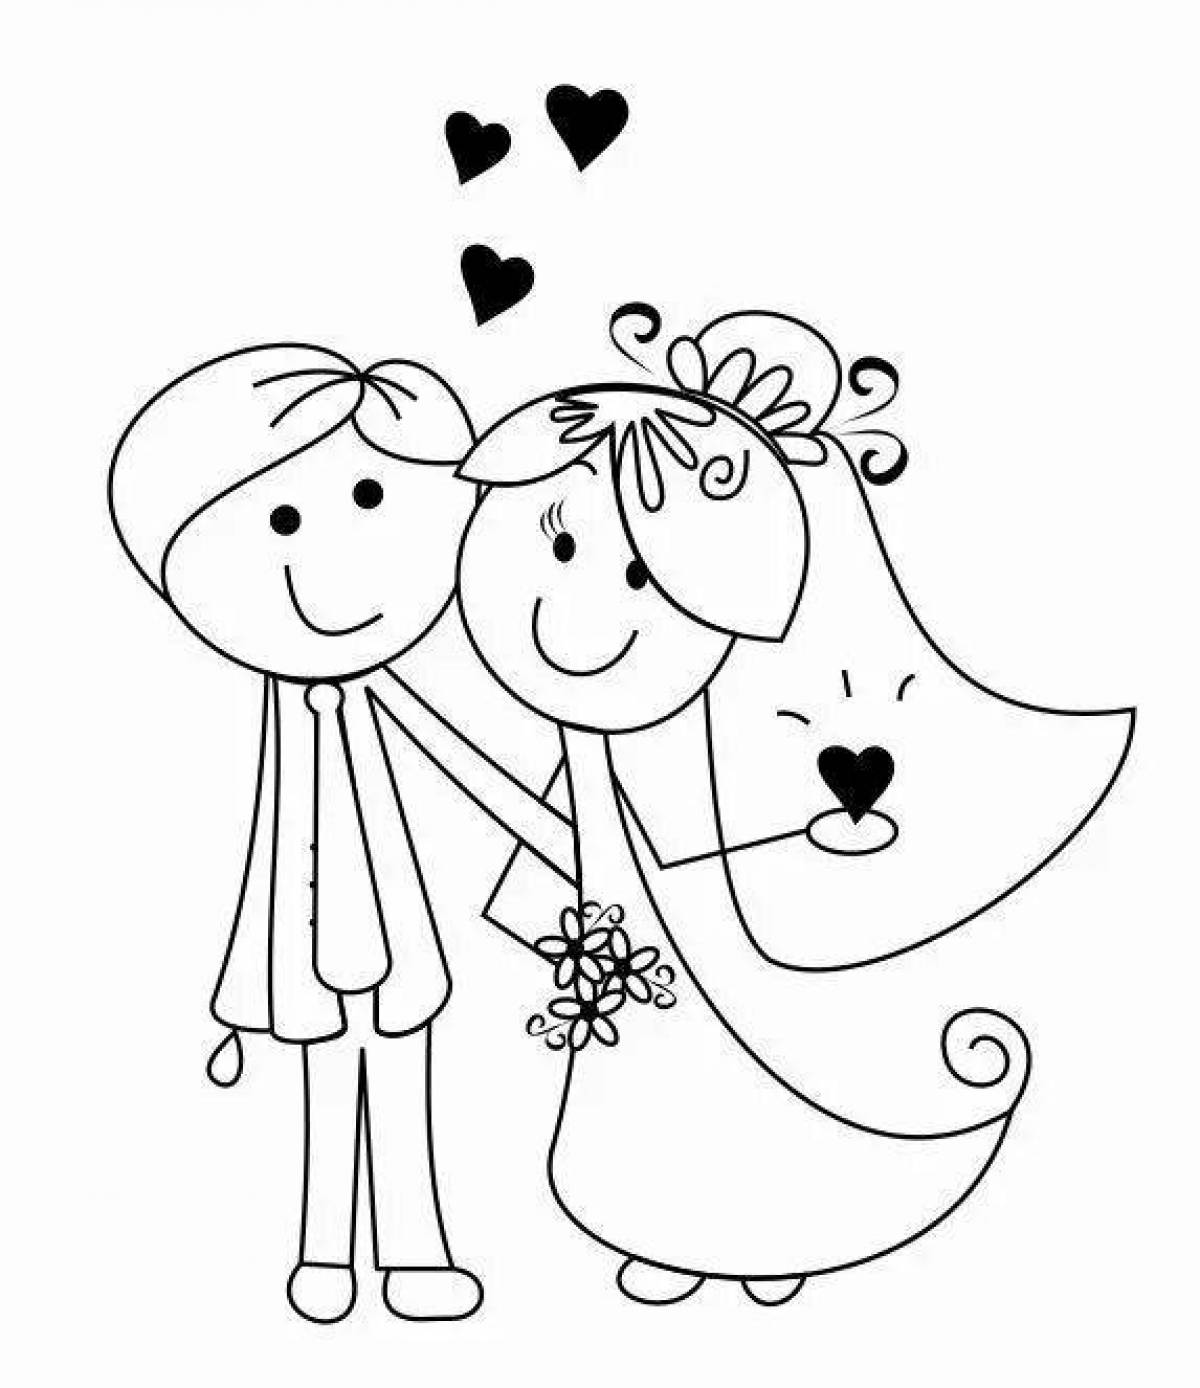 Fantastic bride and groom coloring page